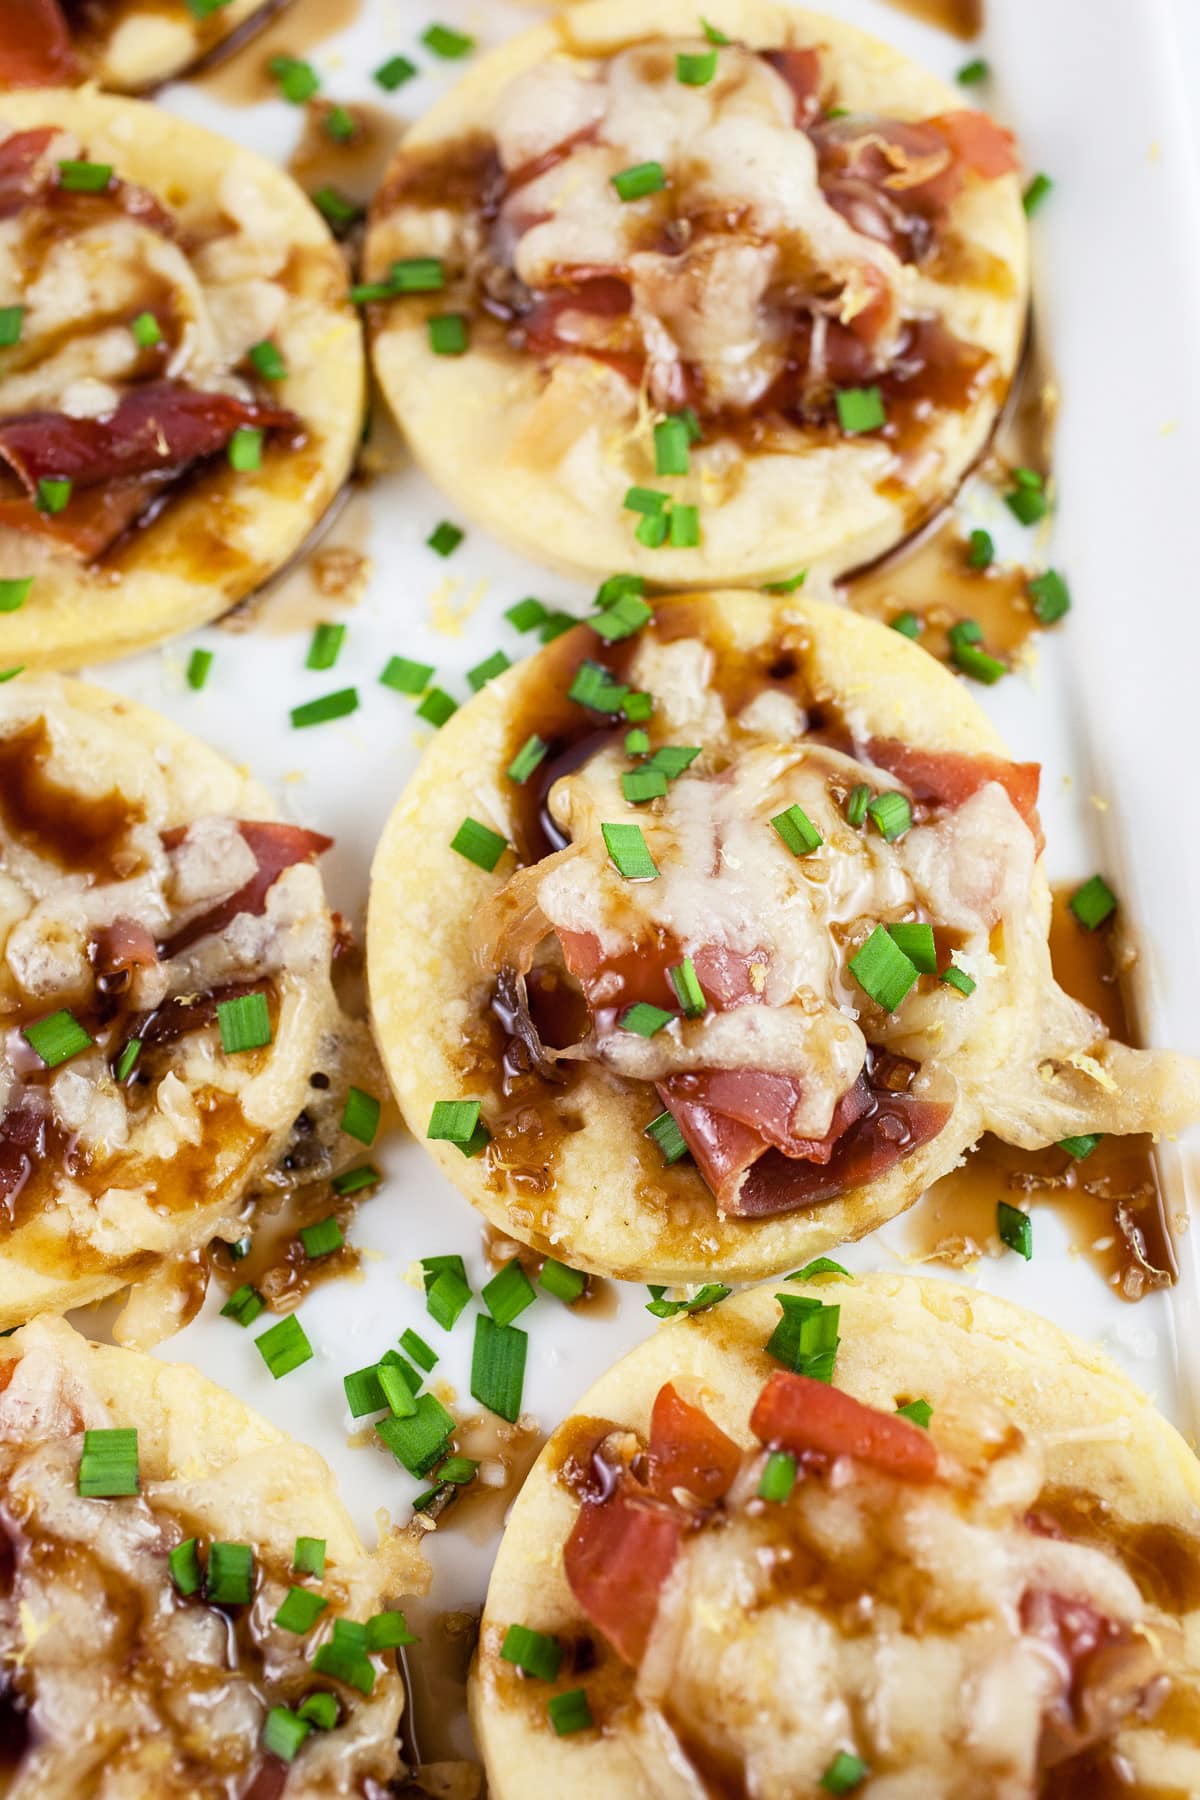 Prosciutto and Cheese Puff Pastry Pinwheels Recipe